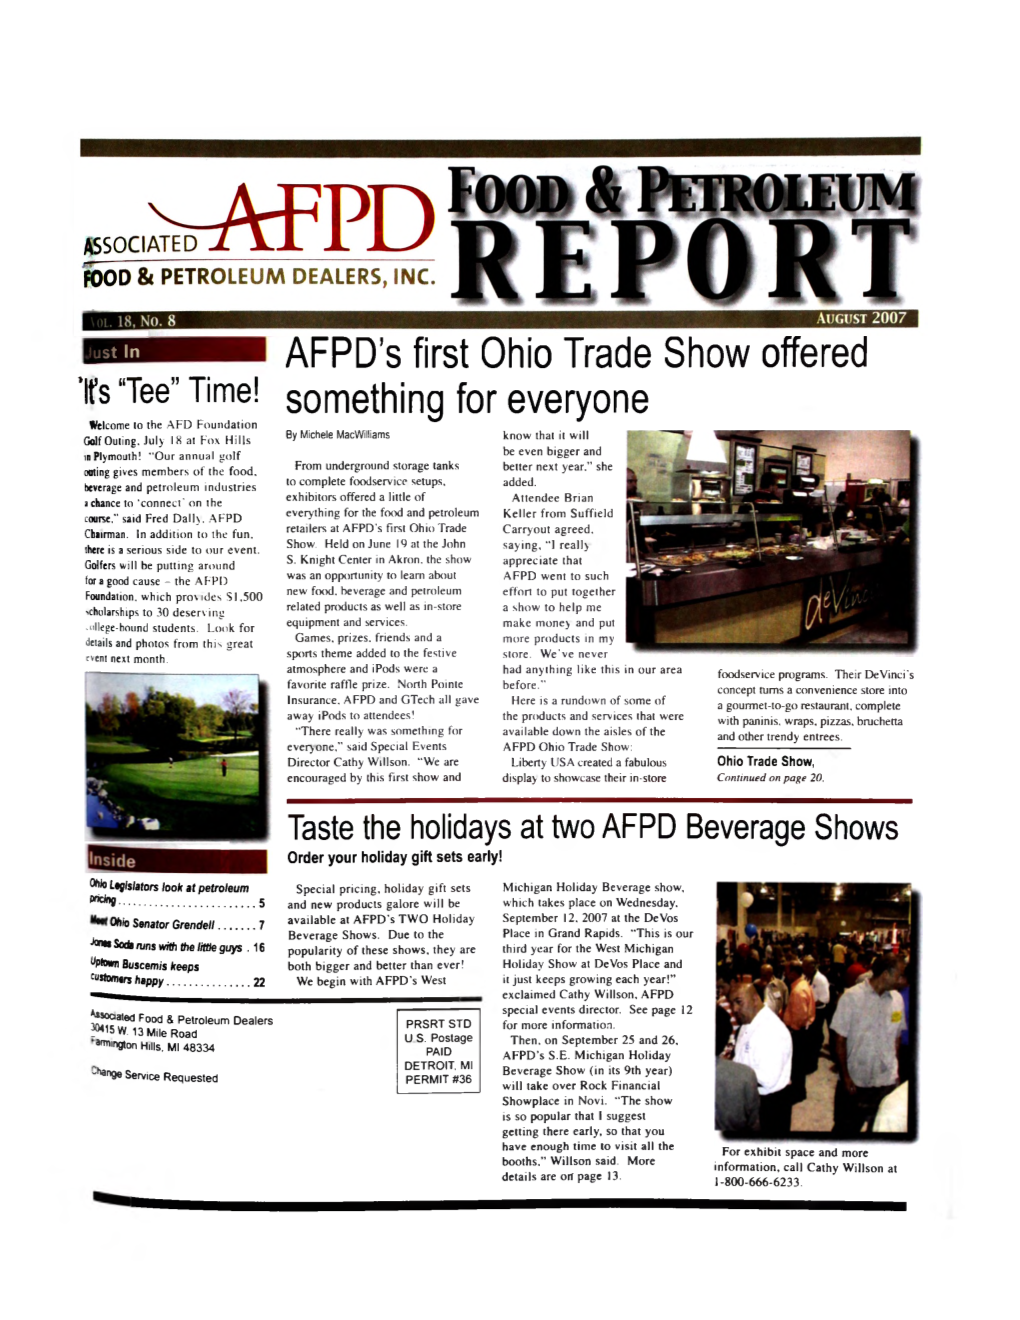 AFPD's First Ohio Trade Show Offered Something for Everyone